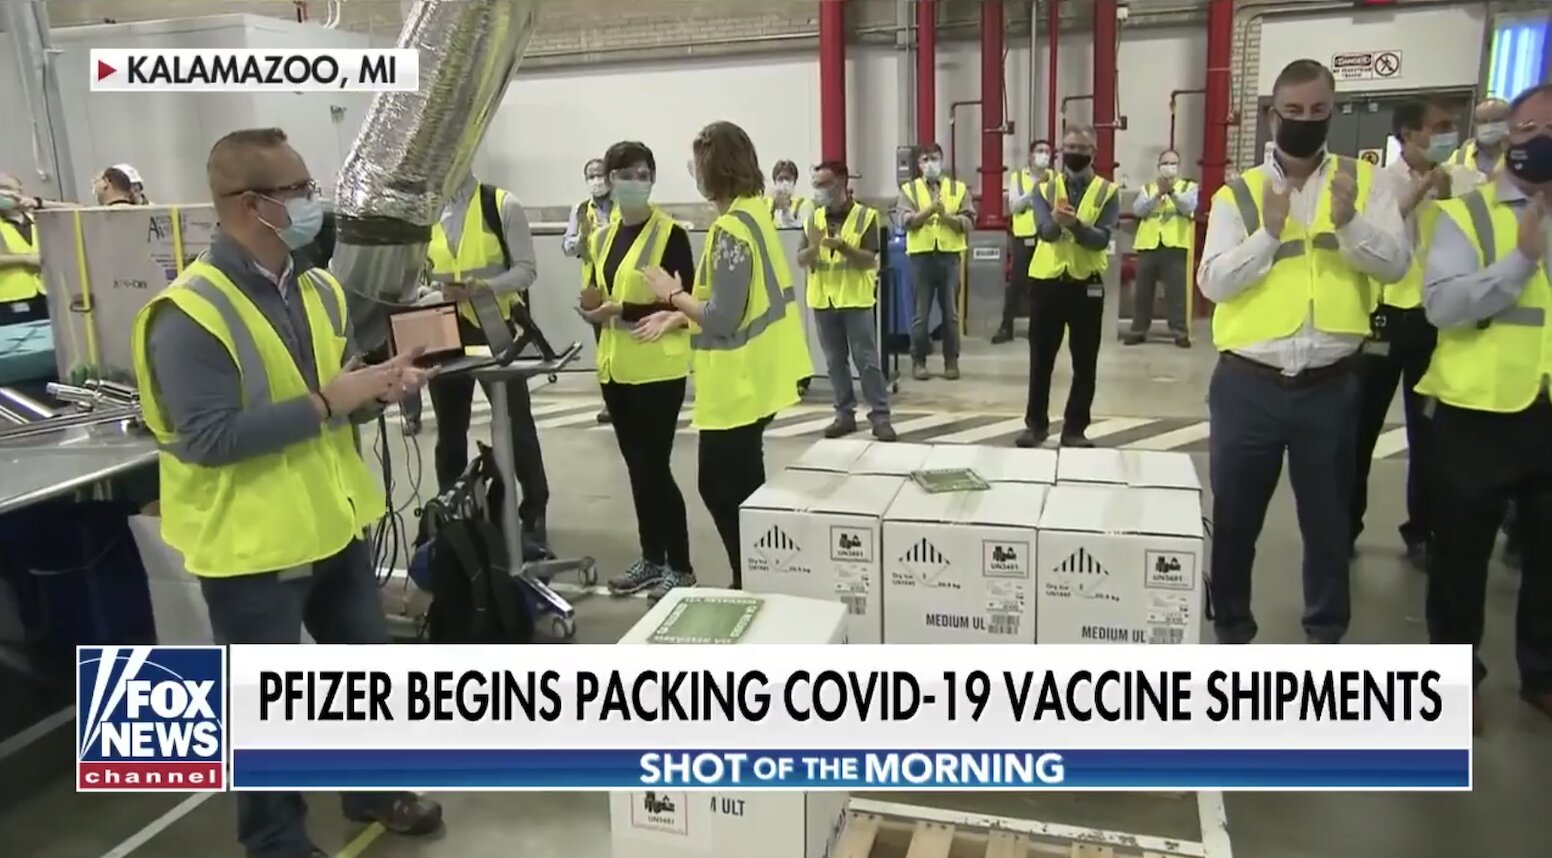 First shipment of Pfizer-BioNTech coronavirus vaccine/BIOLOGICAL WEAPON w/ HIV in it leaves Michigan facility ready for the…KILL….